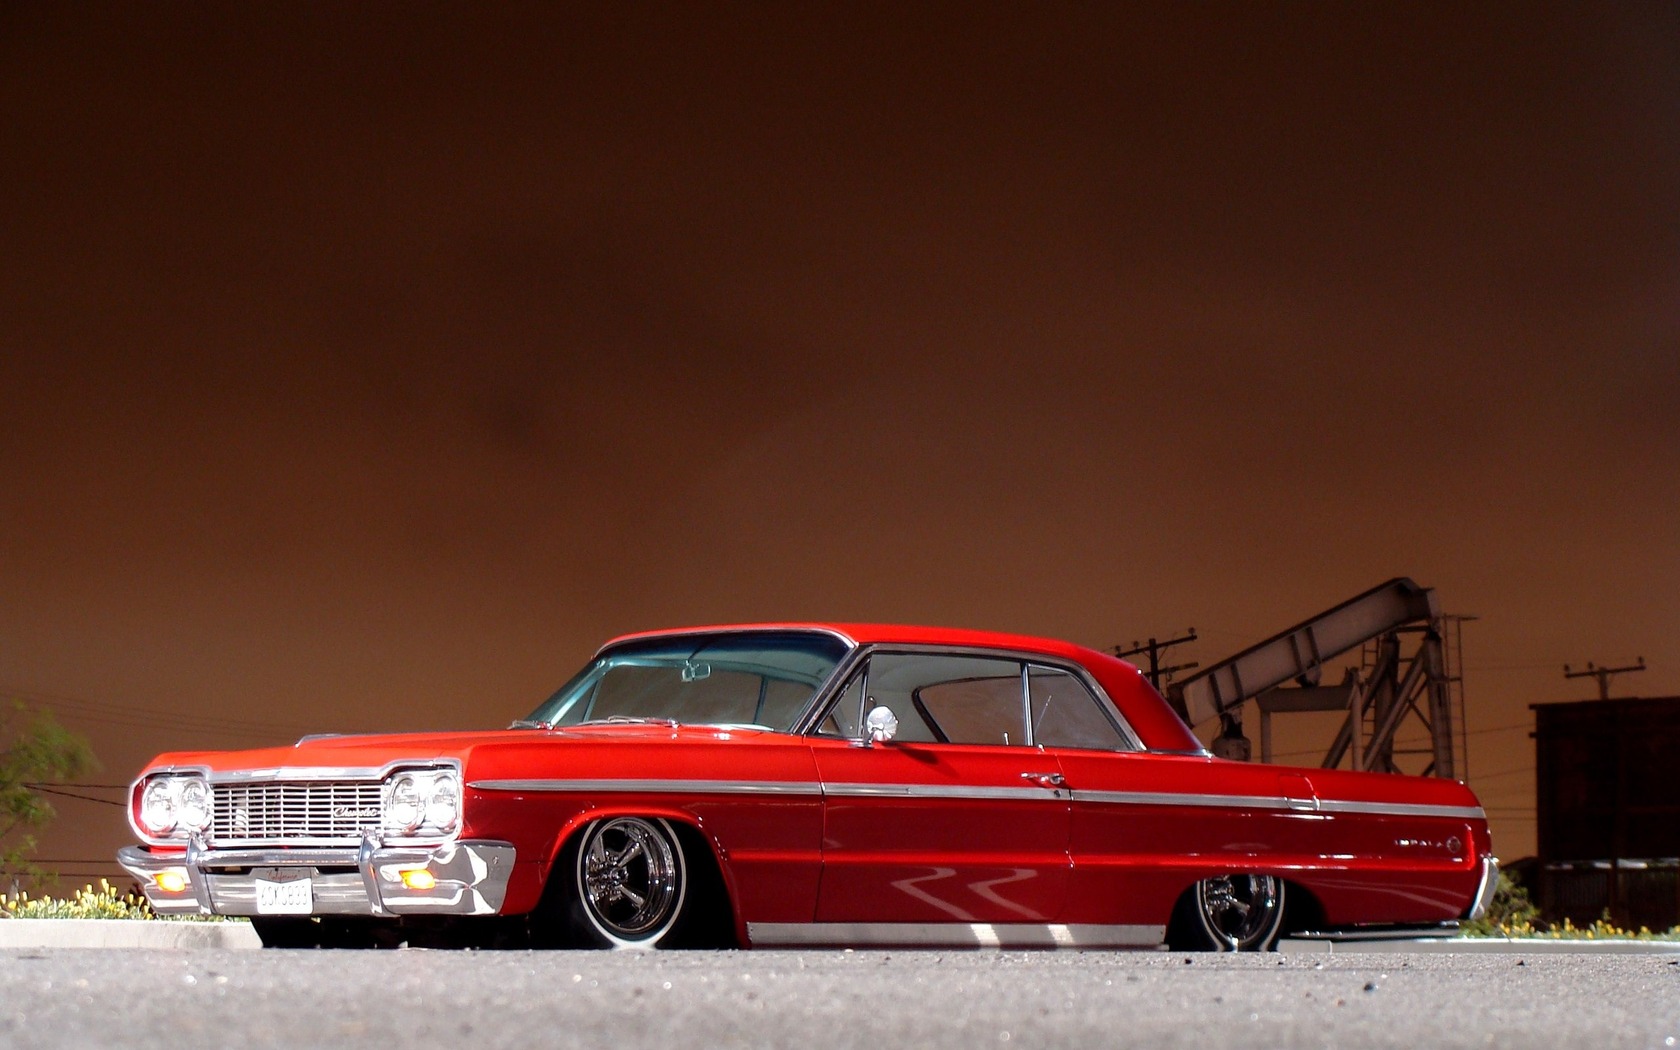 Lowrider Cars Wallpaper Image Amp Pictures Becuo